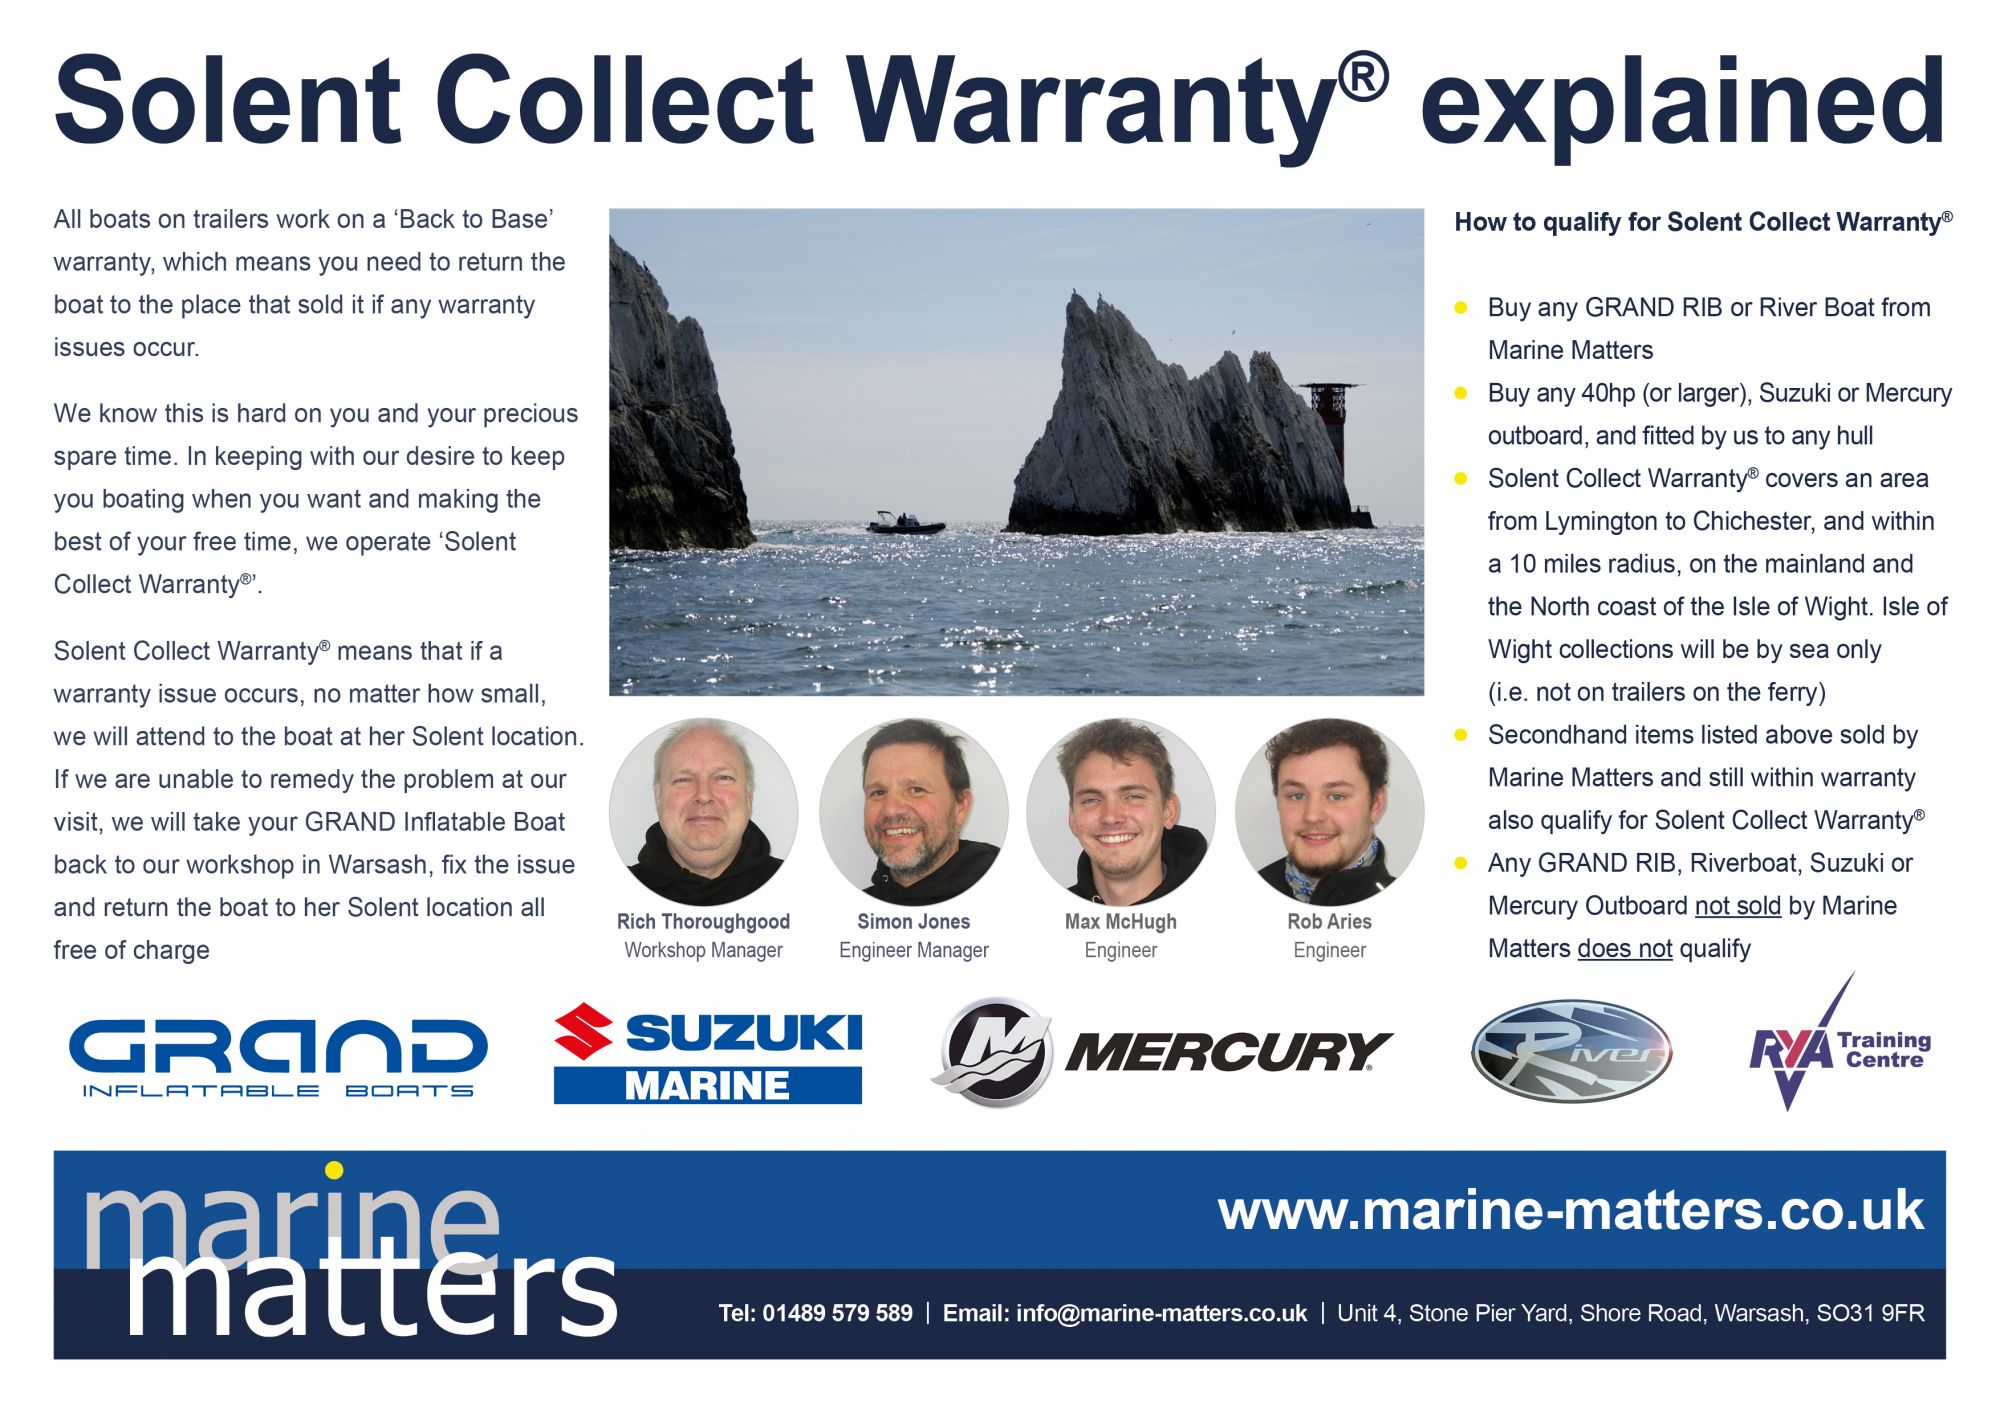 GRAND RIBs Solent Collect Warranty® Explained